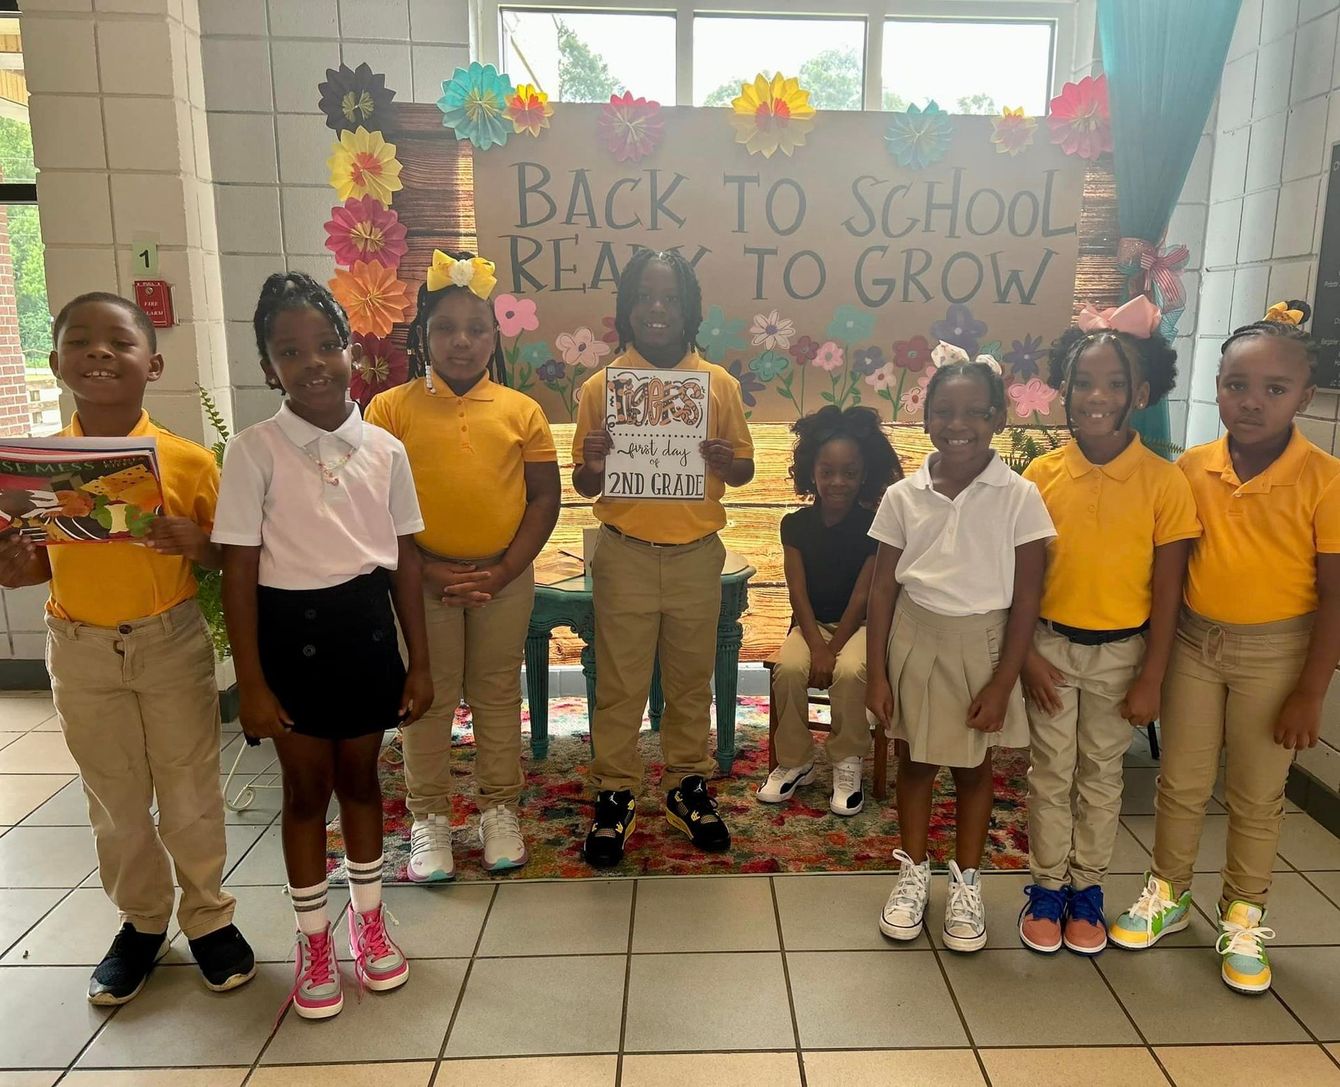 a group of children are standing in front of a sign that says back to school ready to grow